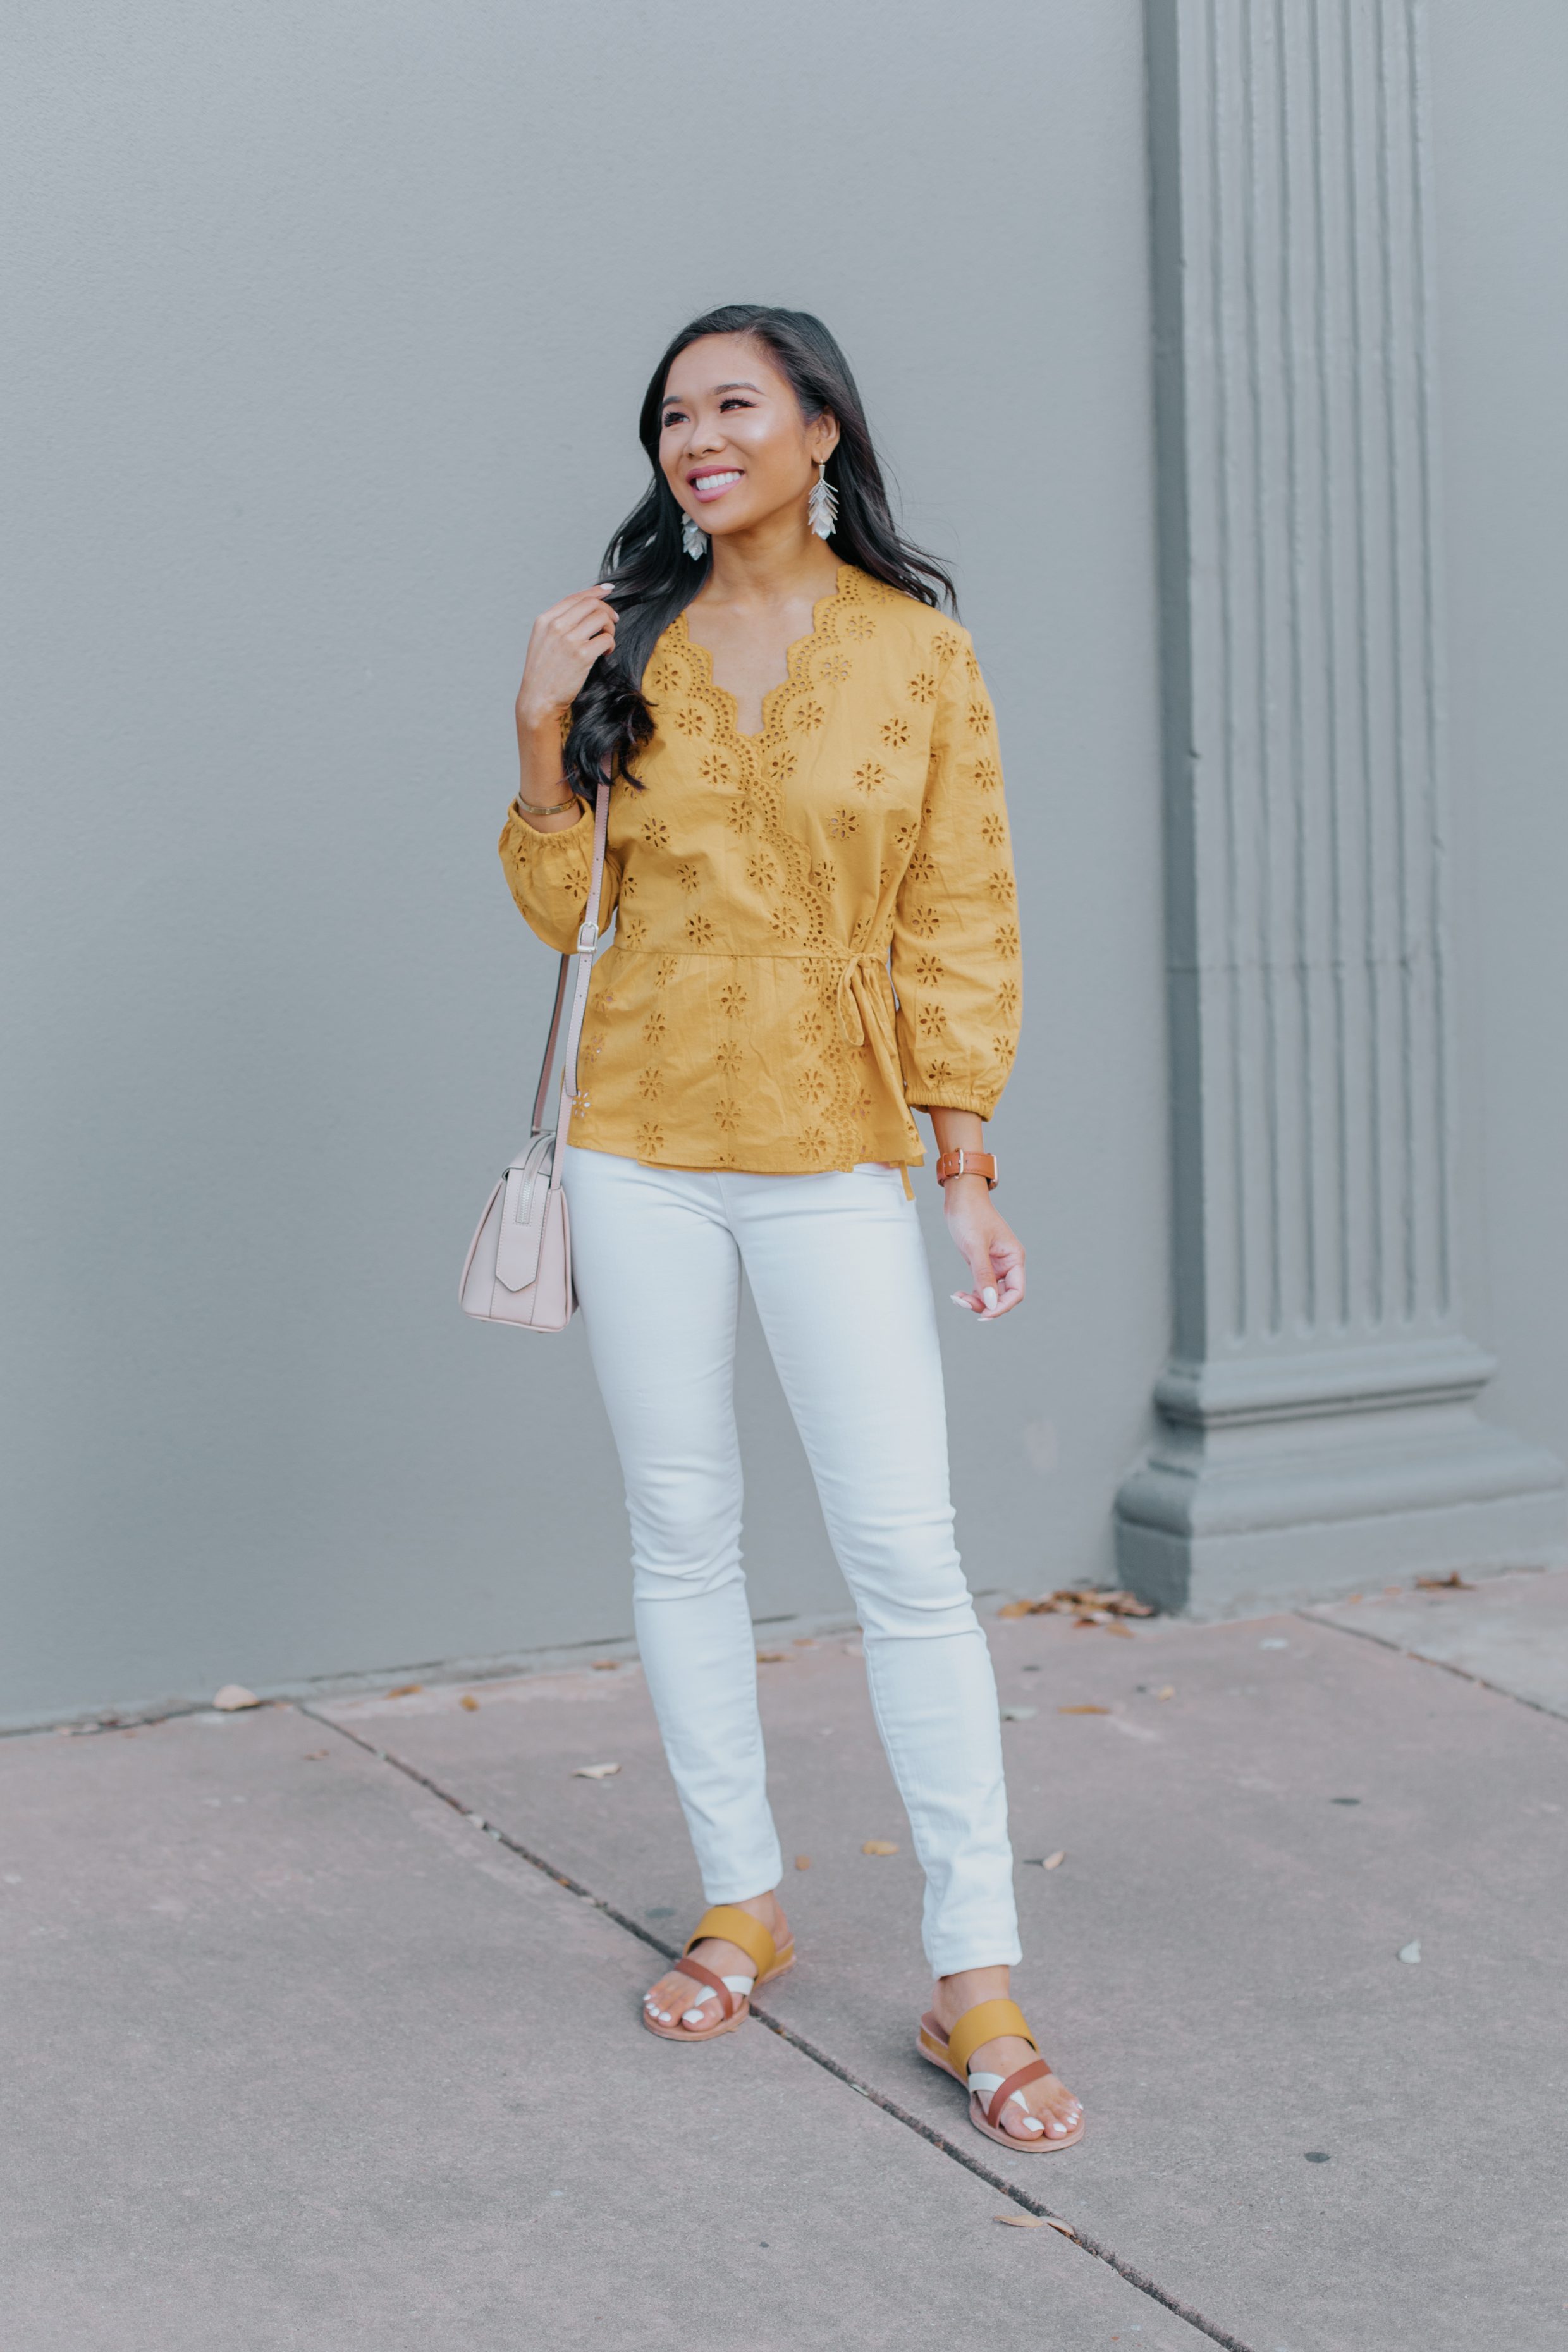 Blogger Hoang-Kim shares four ways to wear yellow this spring